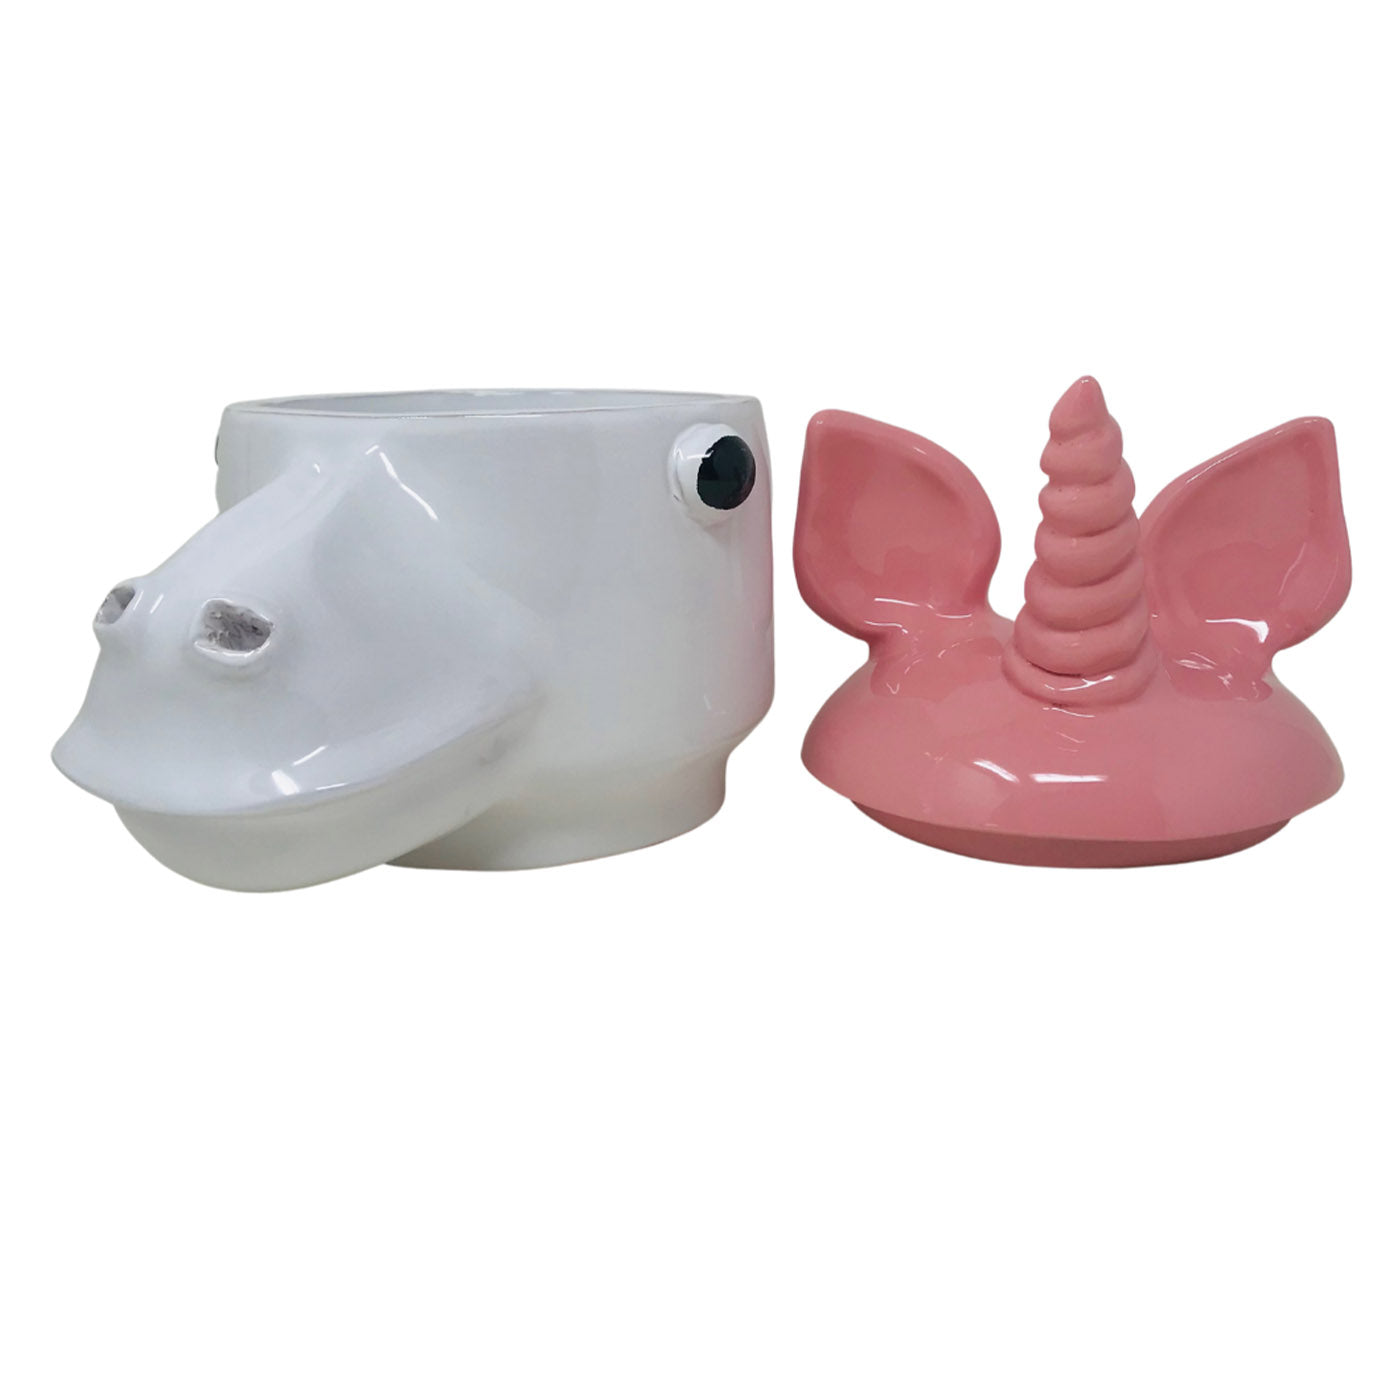 Small Pink and White Unicorn Container with Lid - Alternative view 2